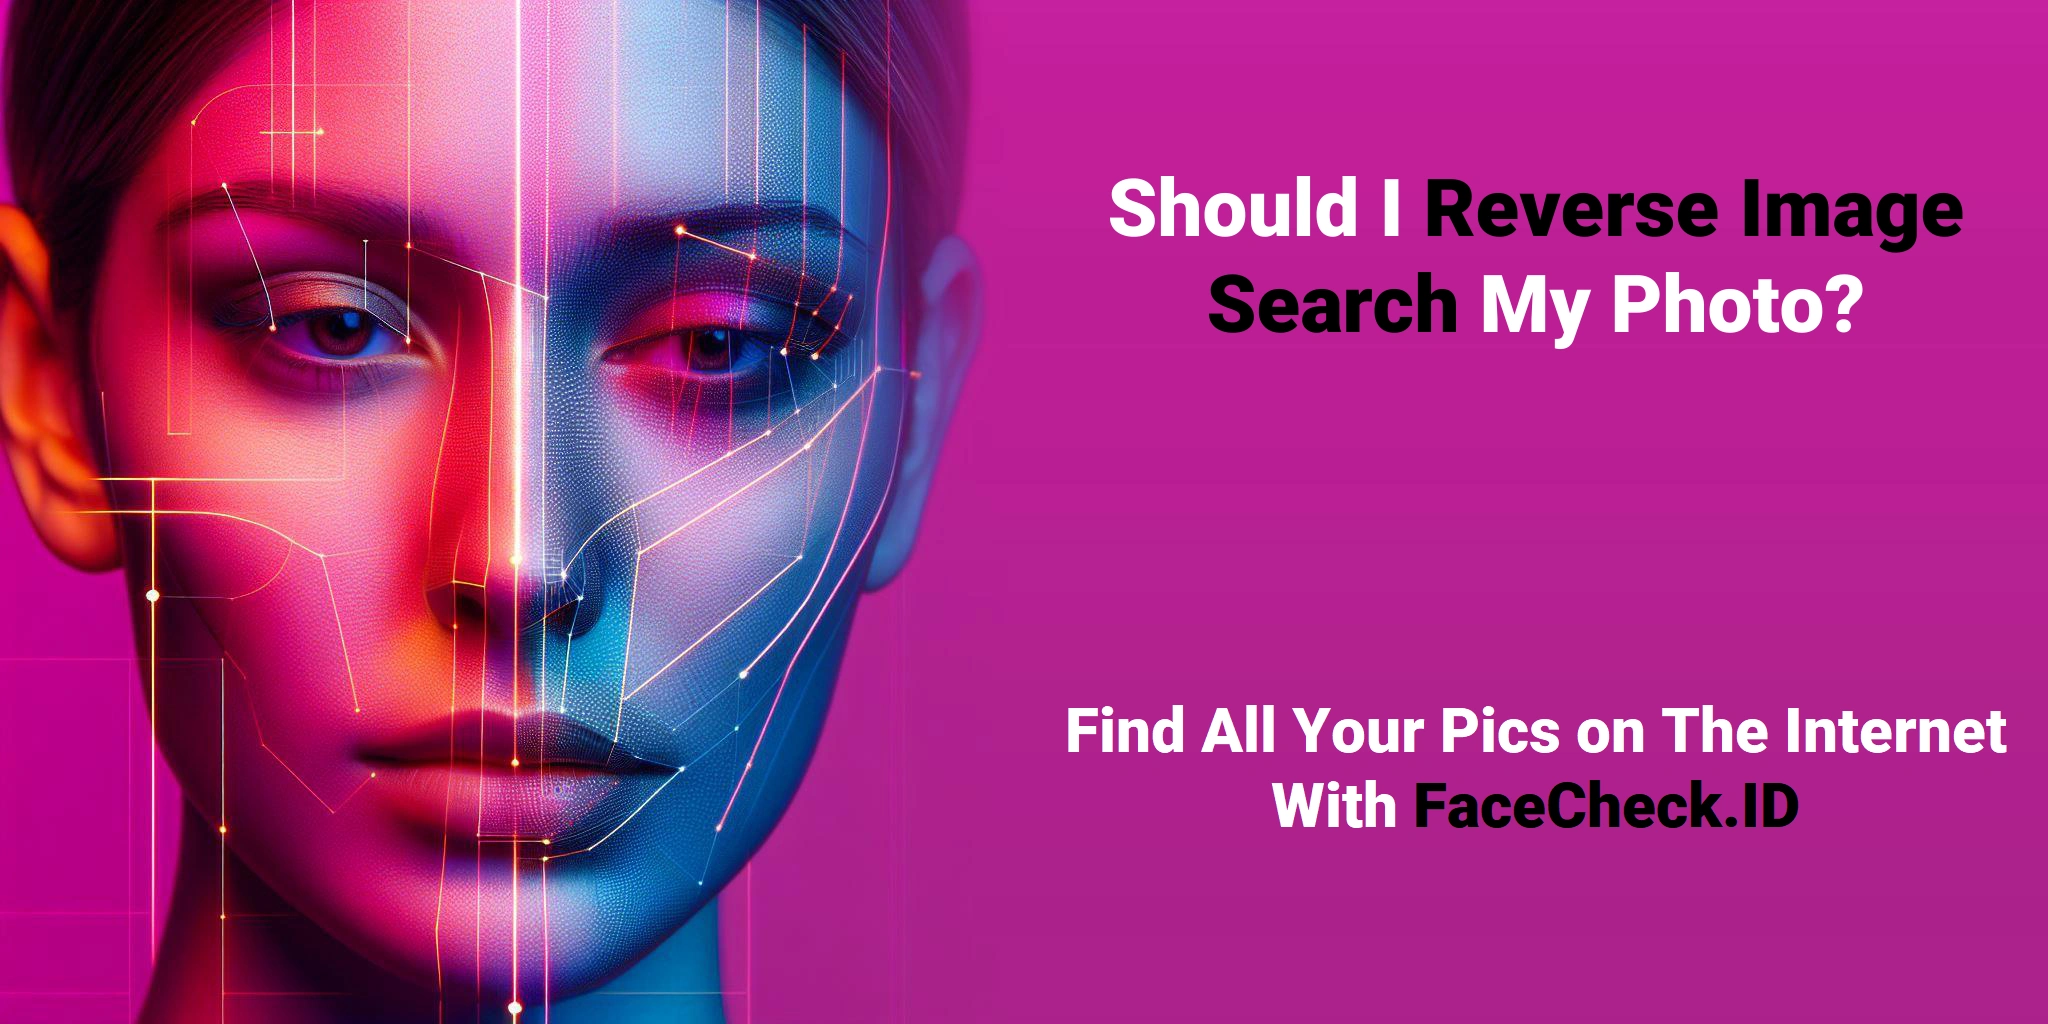 Should I Reverse Image Search My Photo? Find All Your Pics on The Internet With FaceCheck.ID